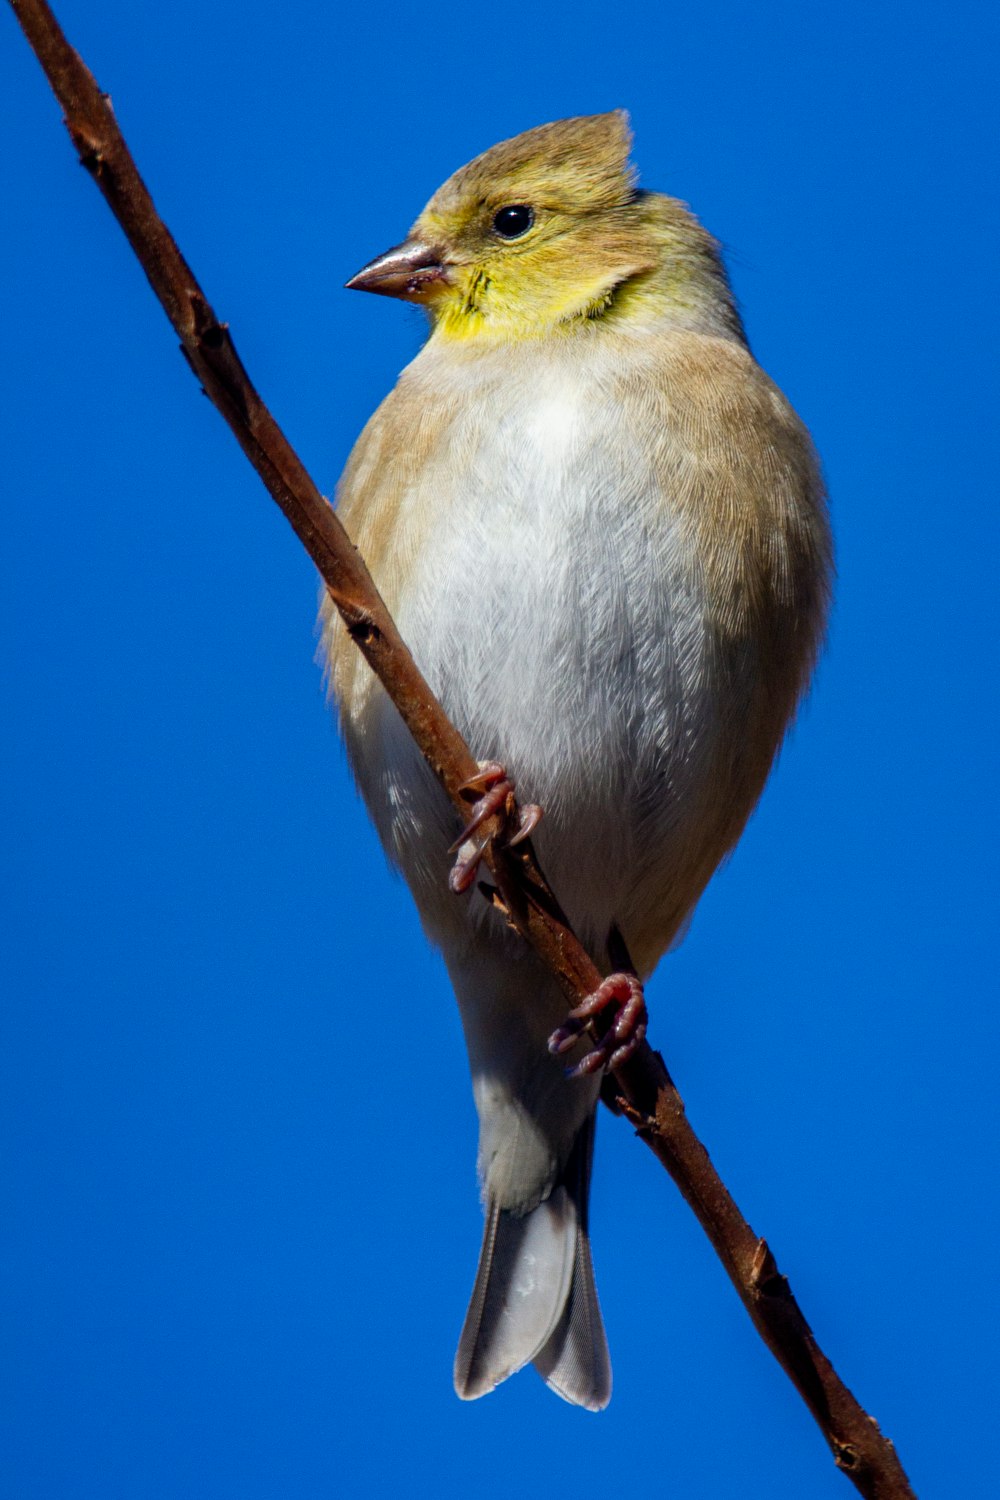 yellow and white bird on brown tree branch during daytime